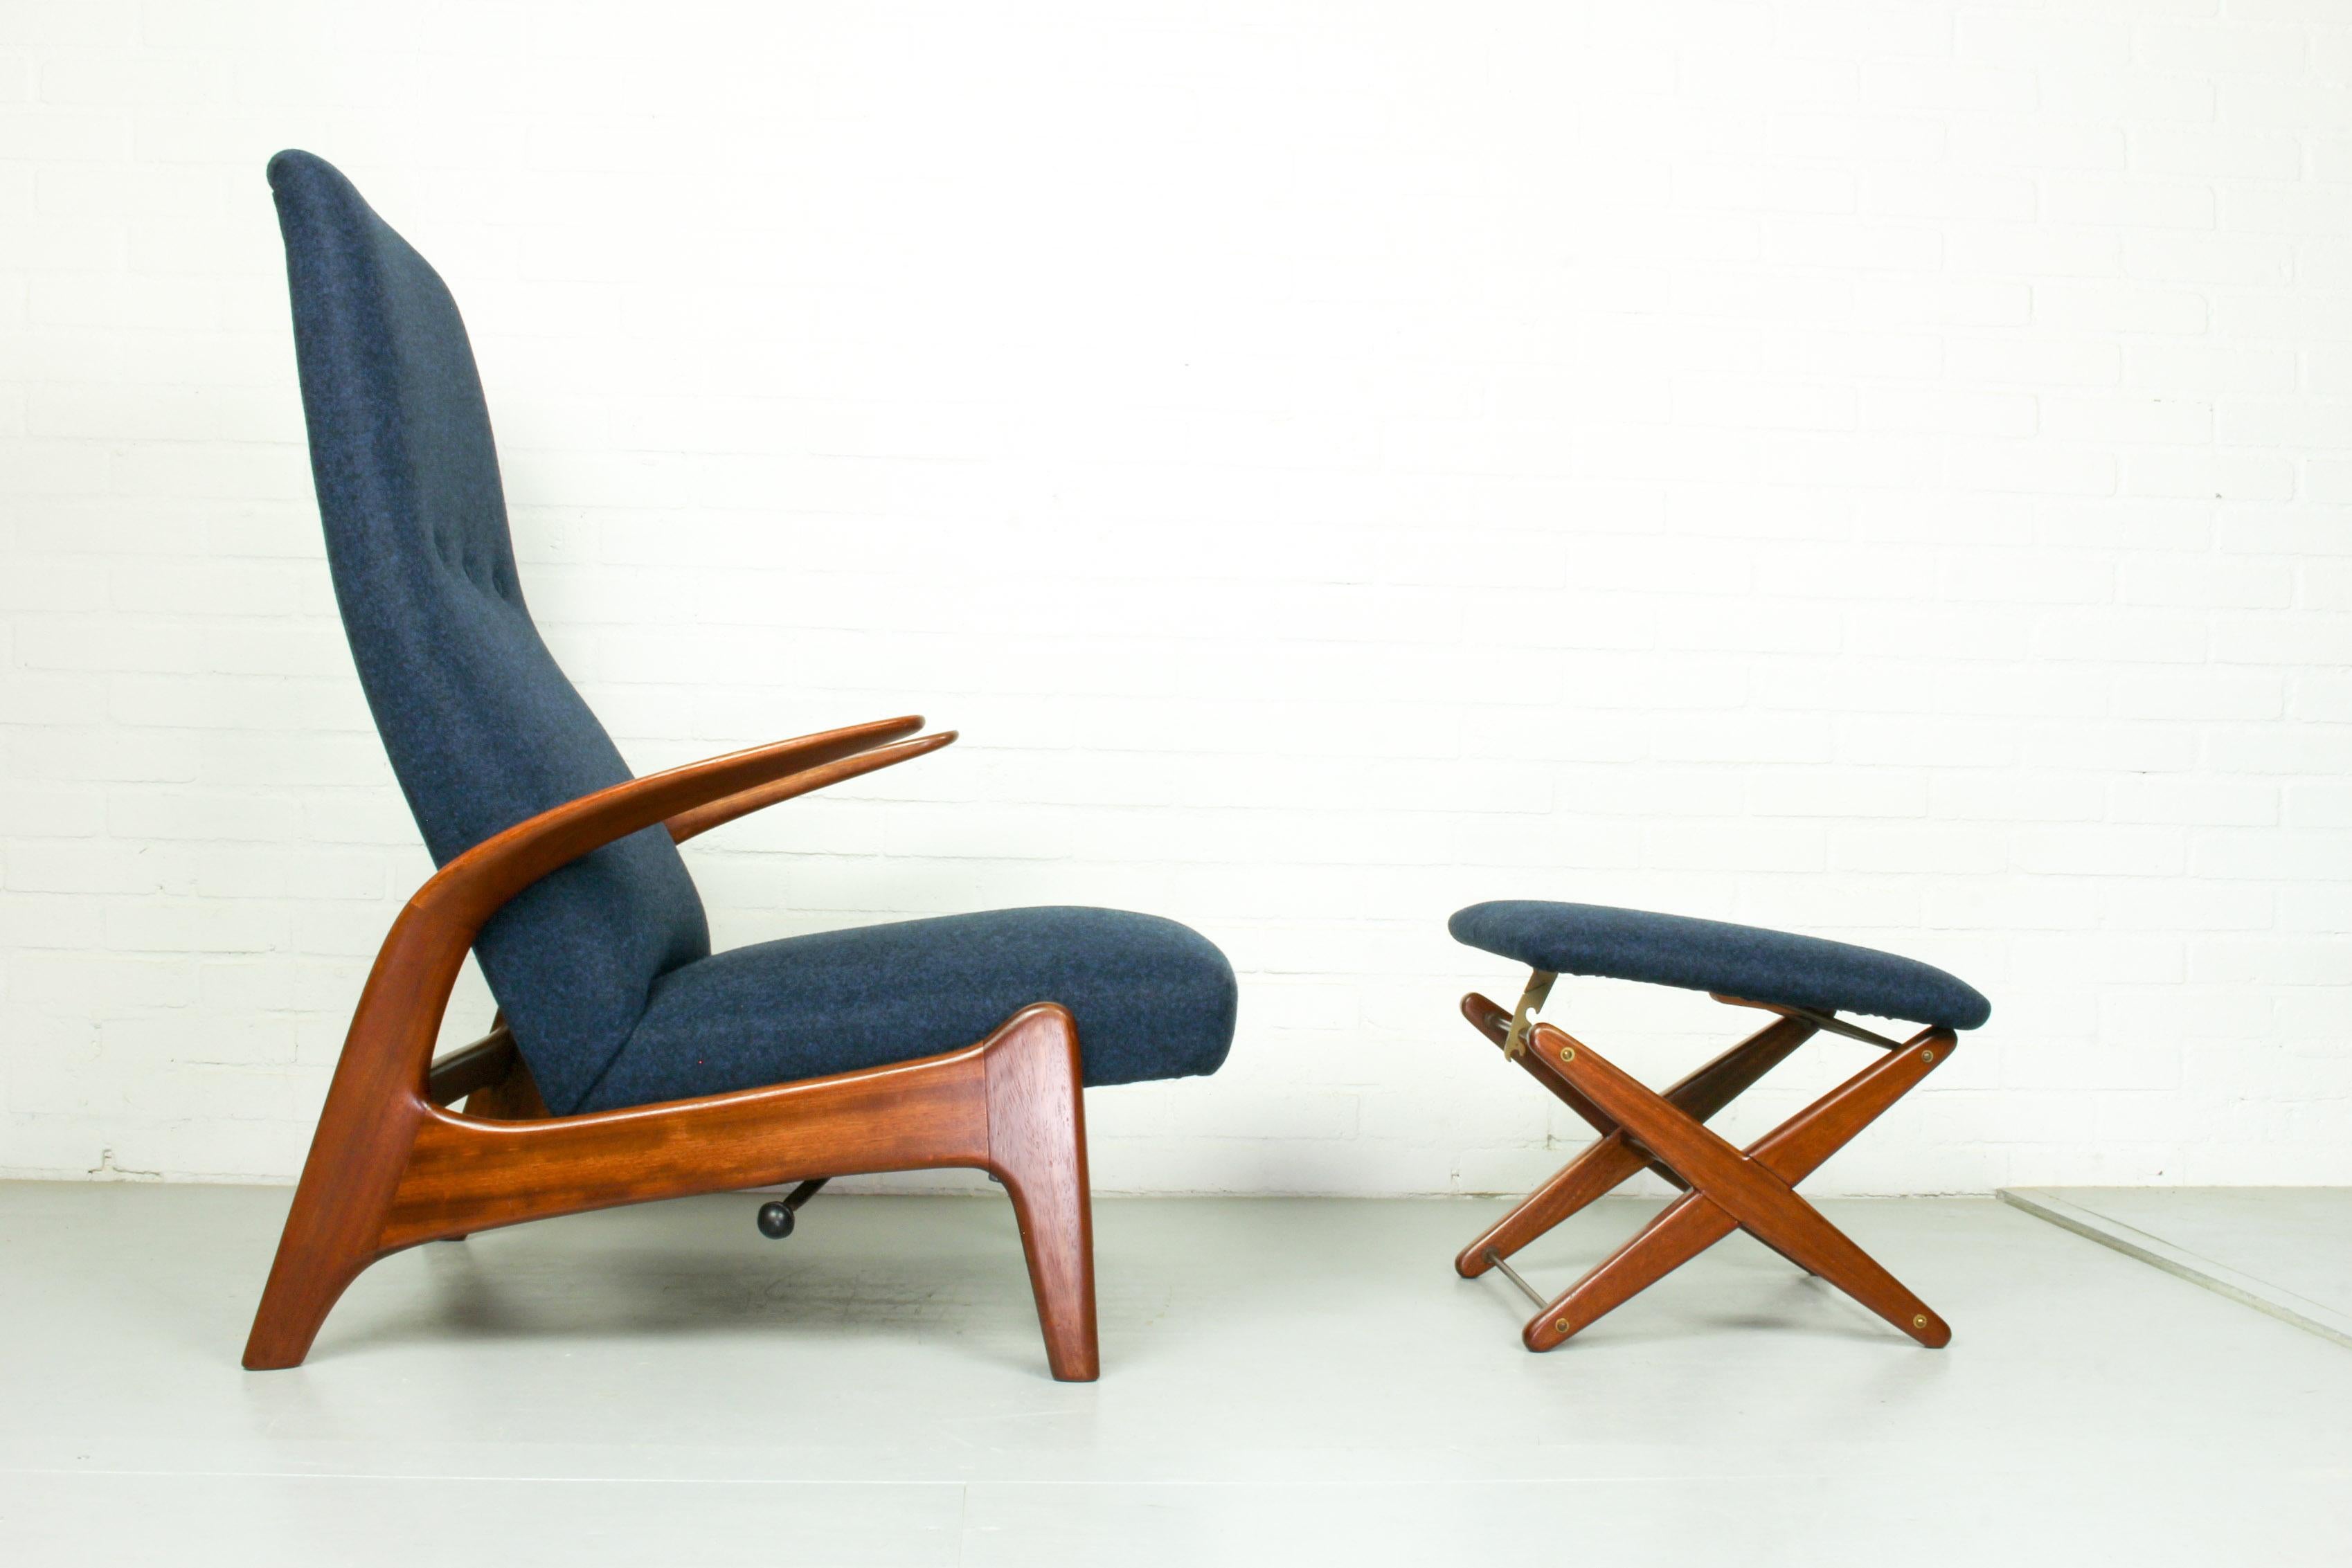 Gimson & Slater’s Rock n’ Rest chair, 1960s. Designed in Norway and made in England. Beautiful modernist design with spectacular form just look at how the arms continue on to the leg. The lounge chair is very comfortable and can be adjusted in